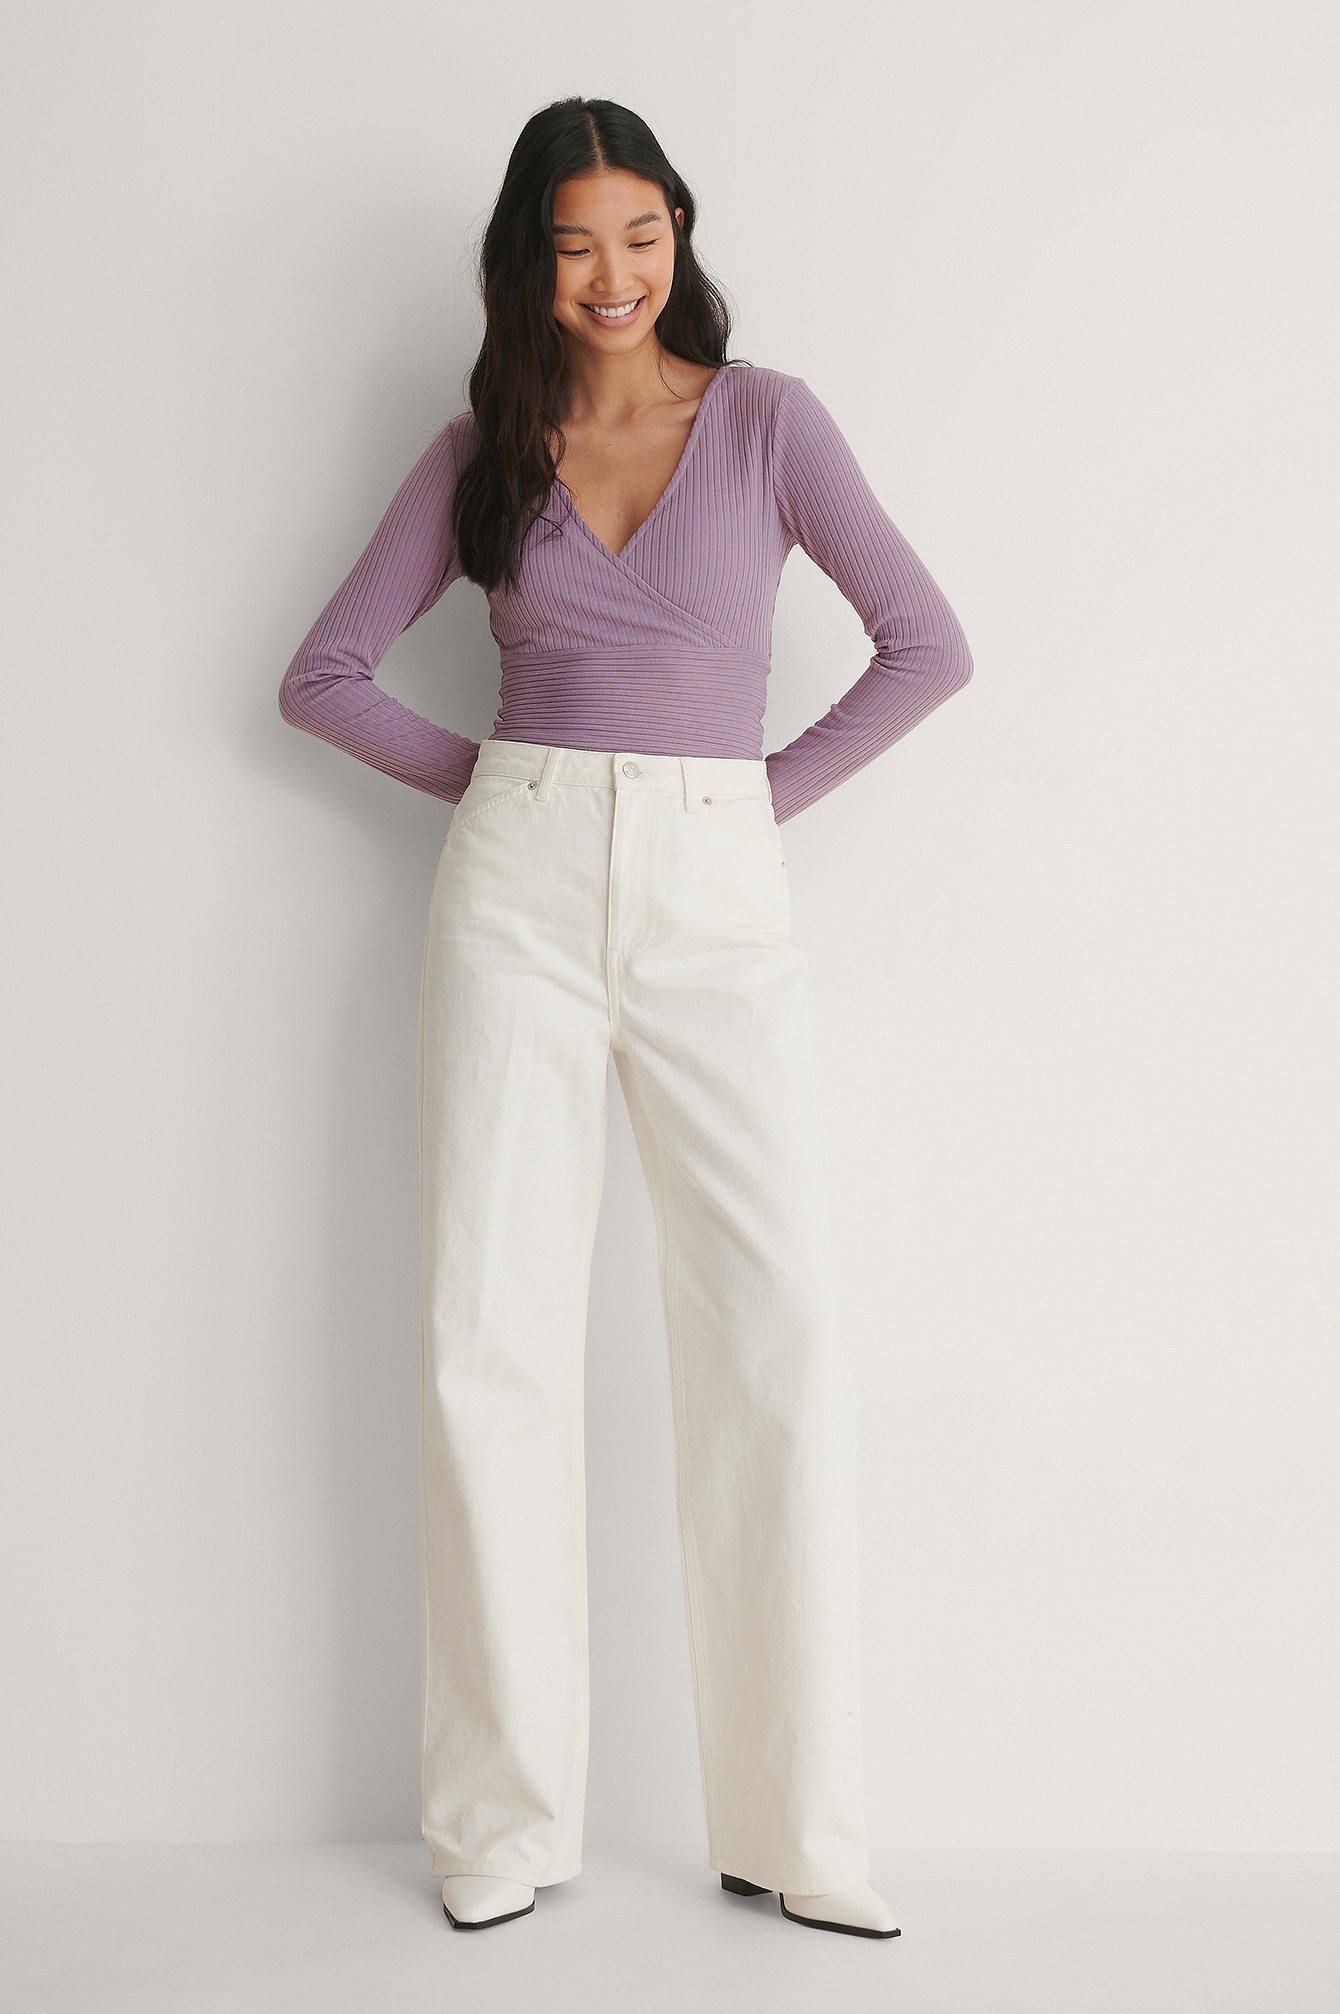 Overlap Ribbed Top Outfit.